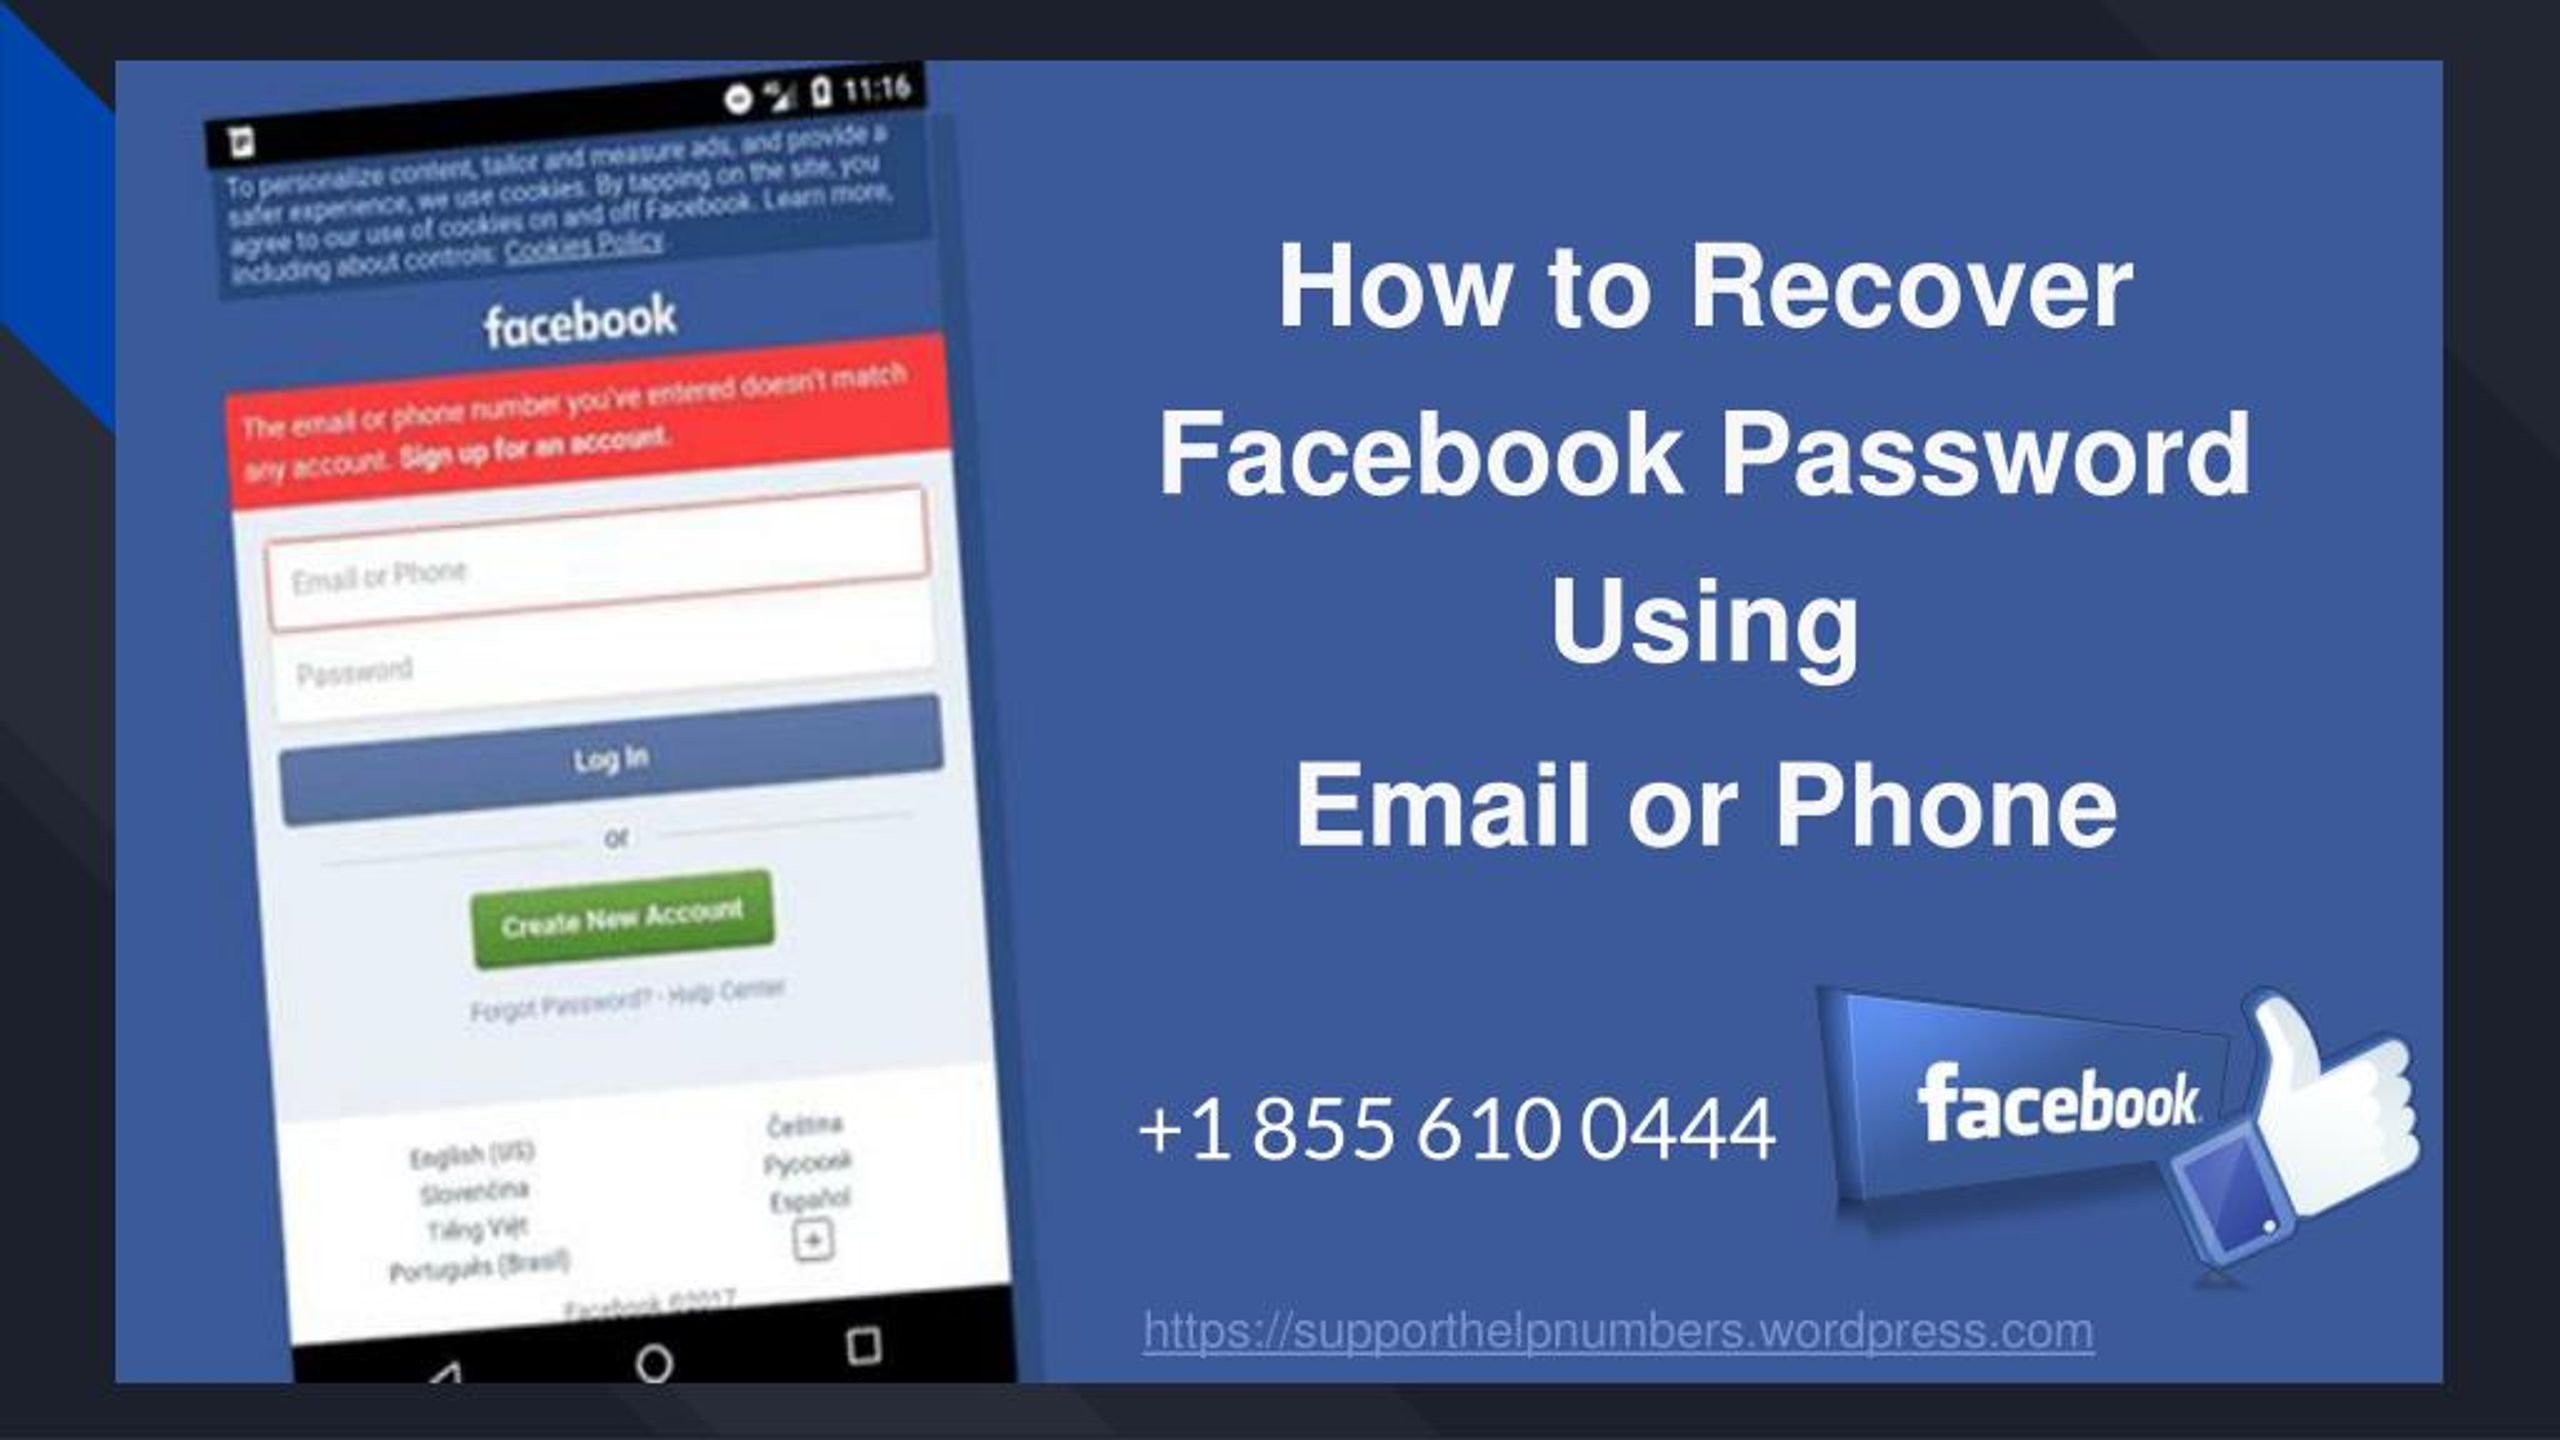 How To Recover Fb Account By Phone Number nda.or.ug